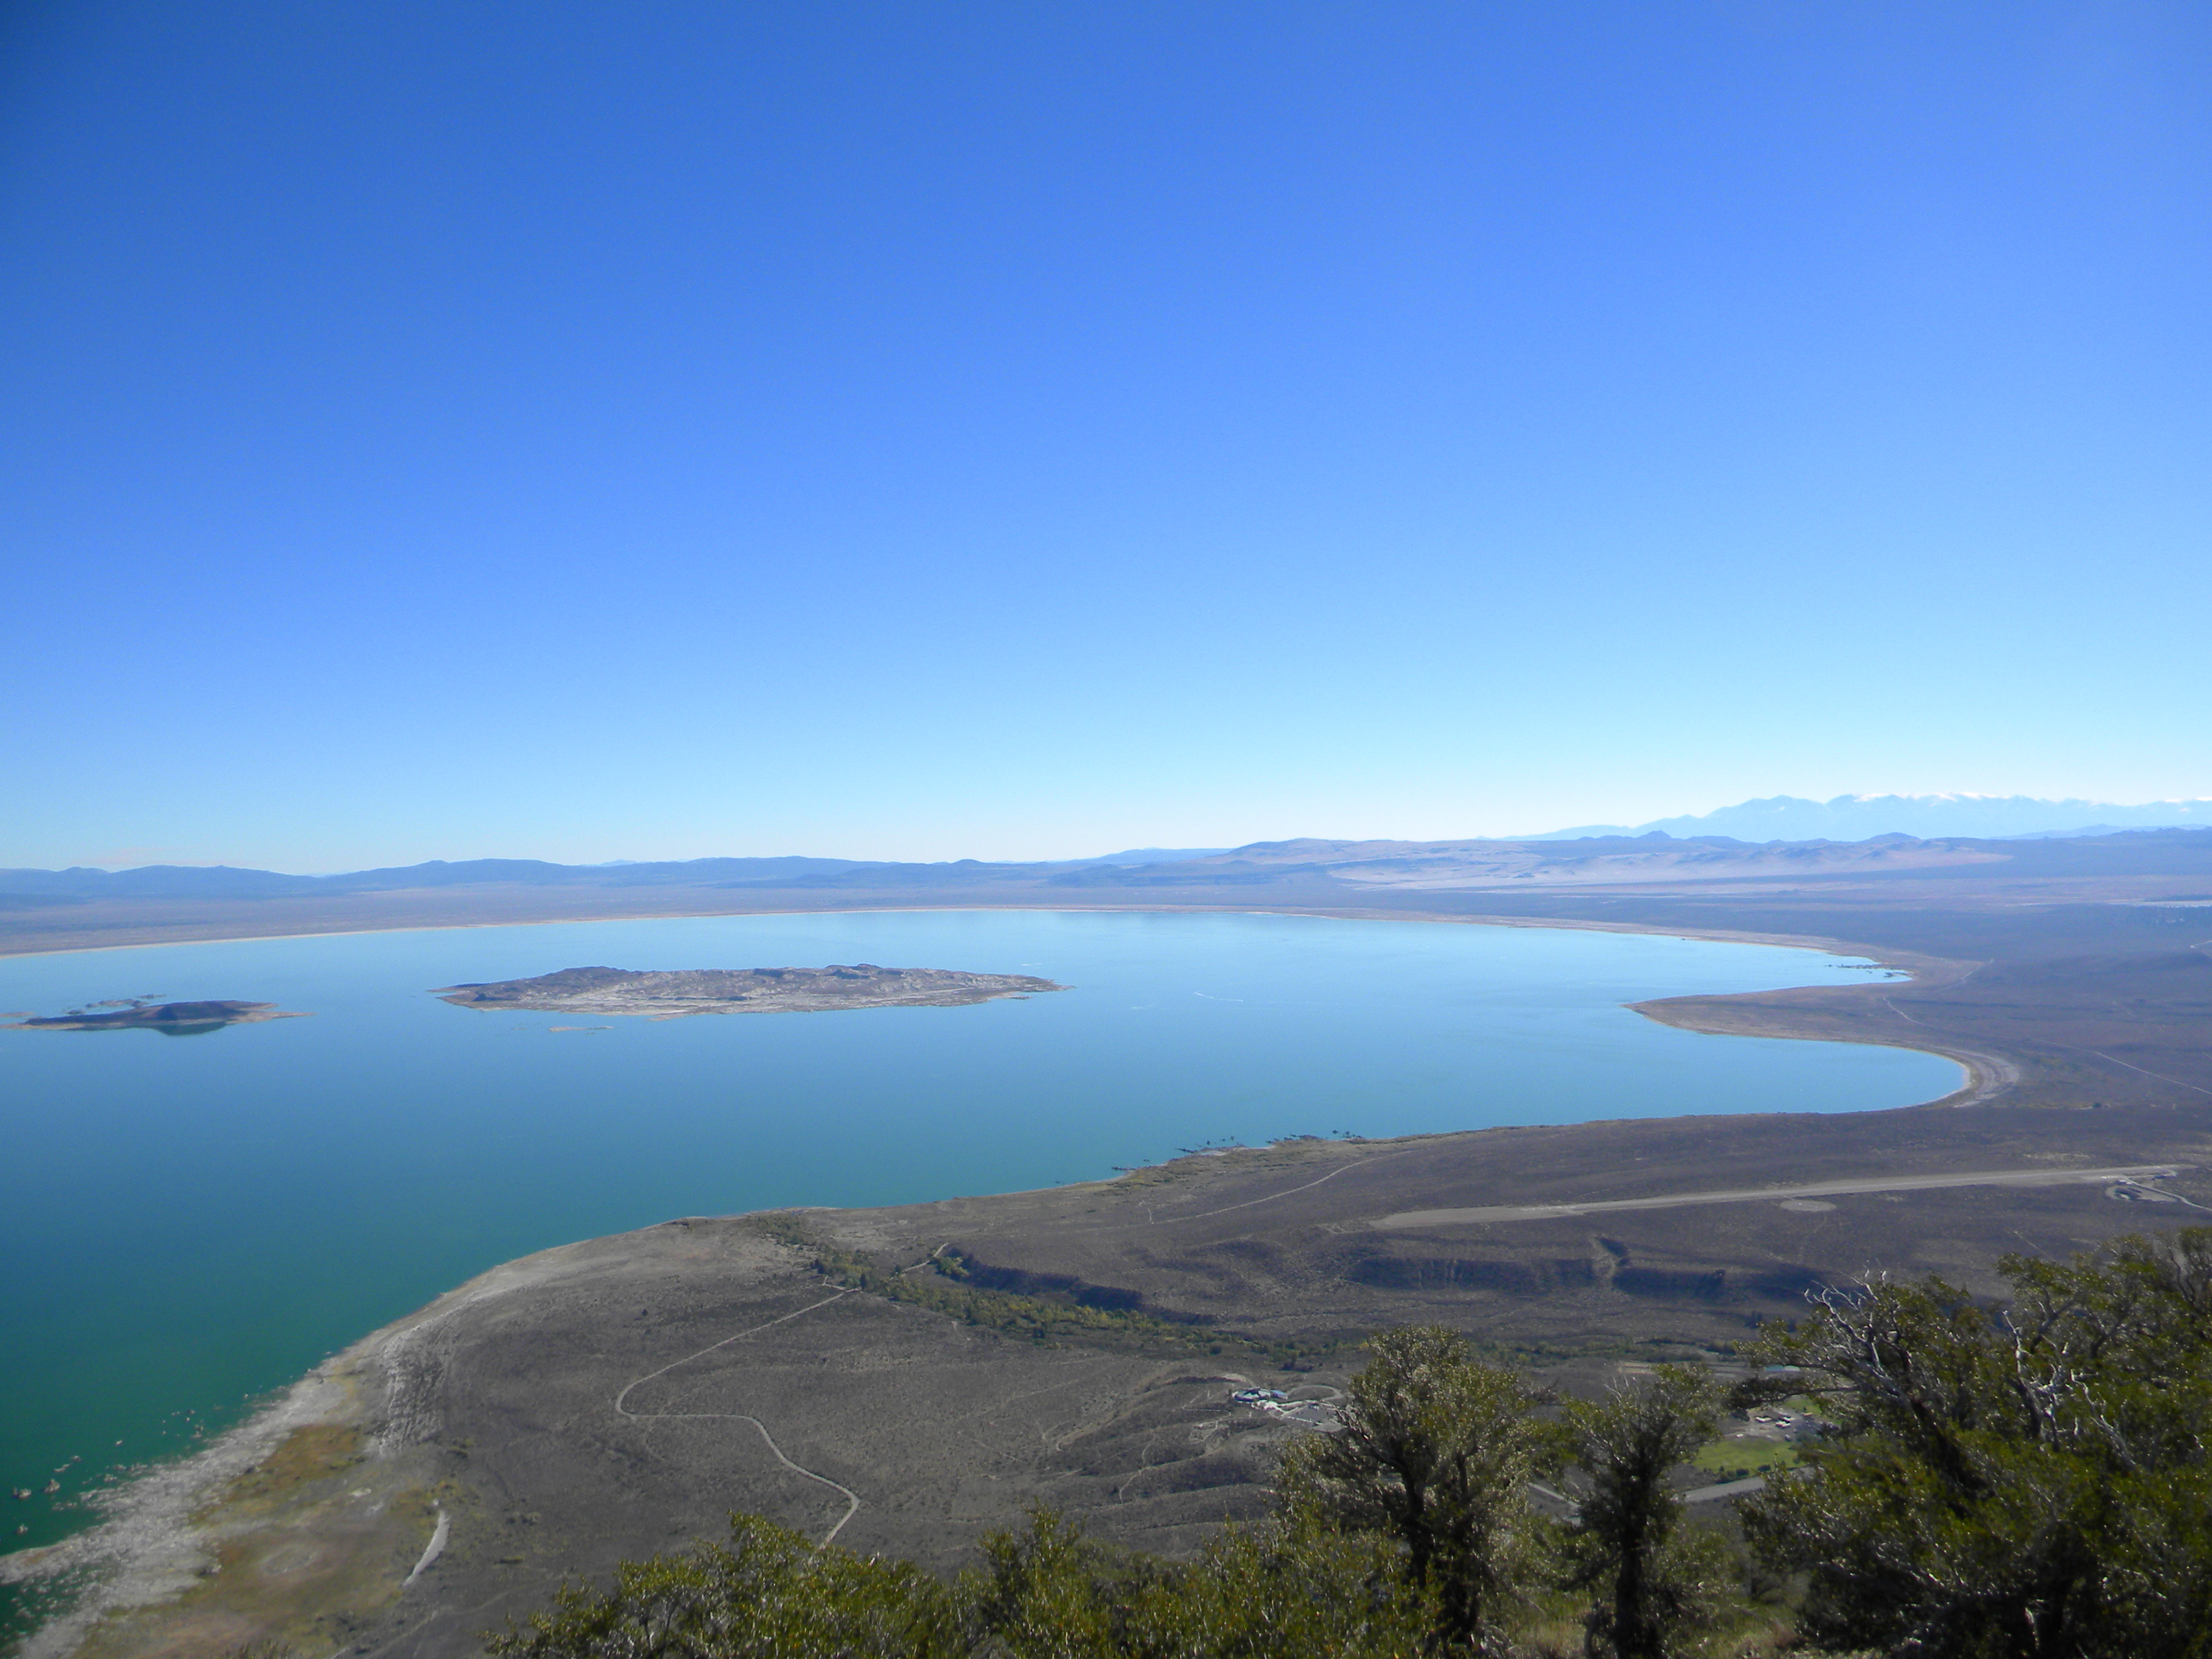 Inyo National Forest - Mono Lake Ranger District